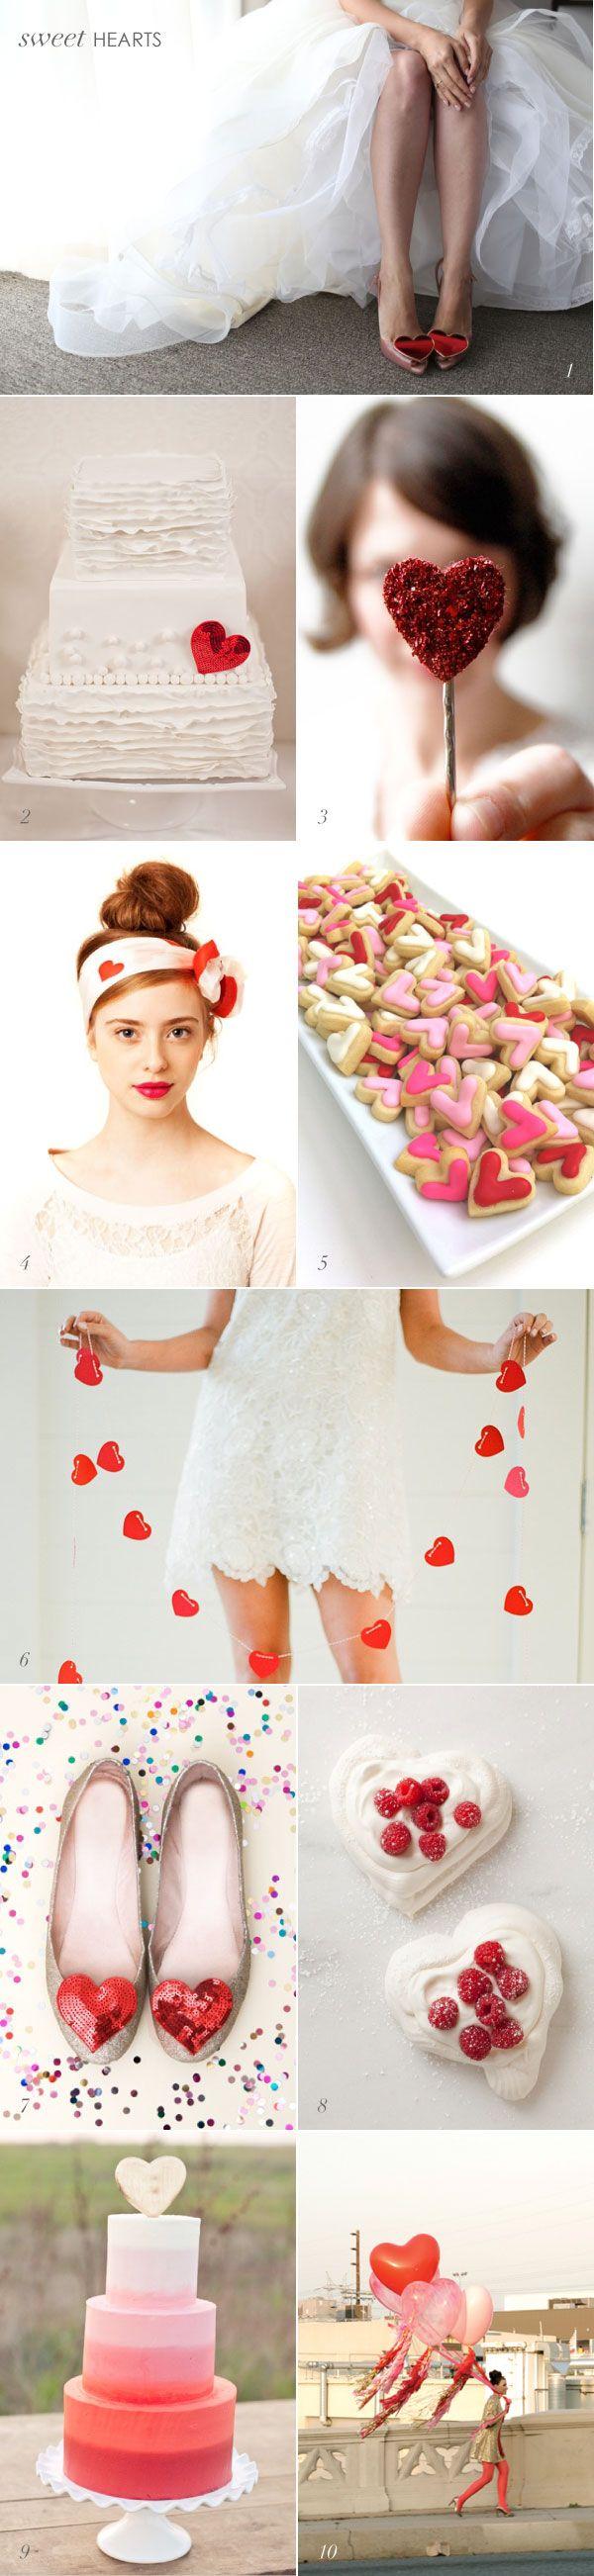 Mariage - Current Crush: Sweet Hearts